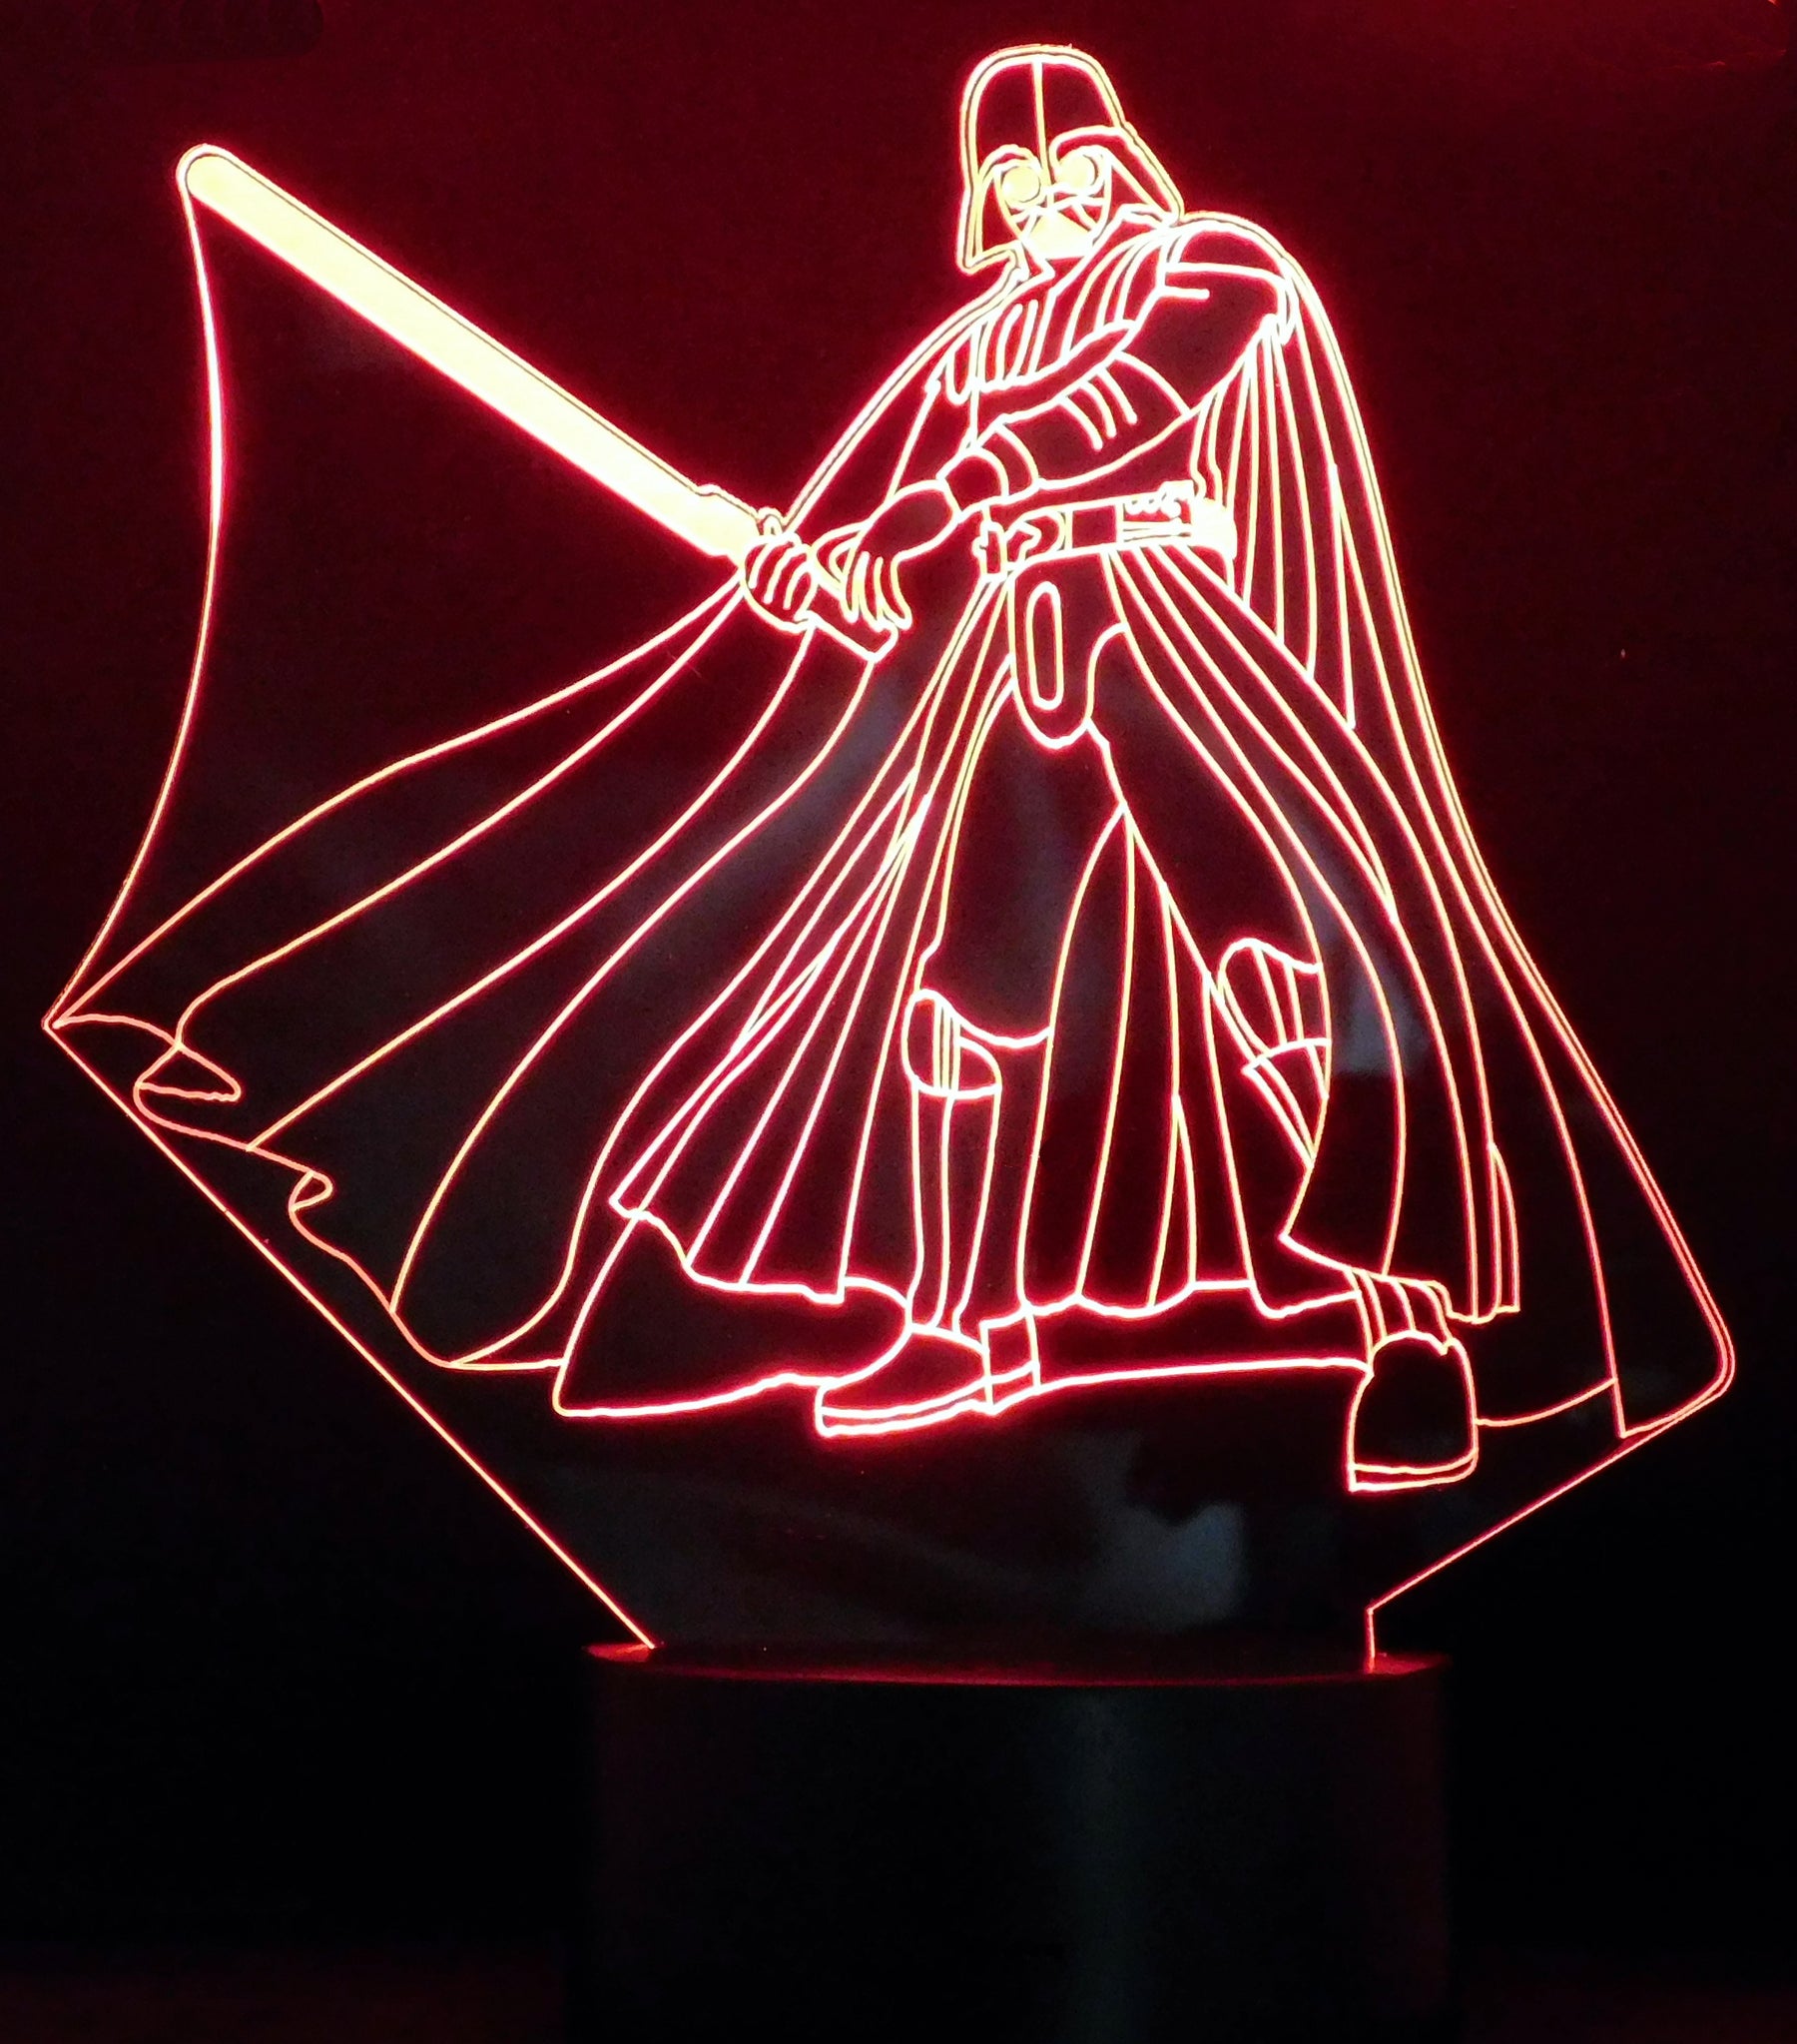 Darth Vader With Sword 3-D Optical Illusion LED Desk, Table, Night Lamp